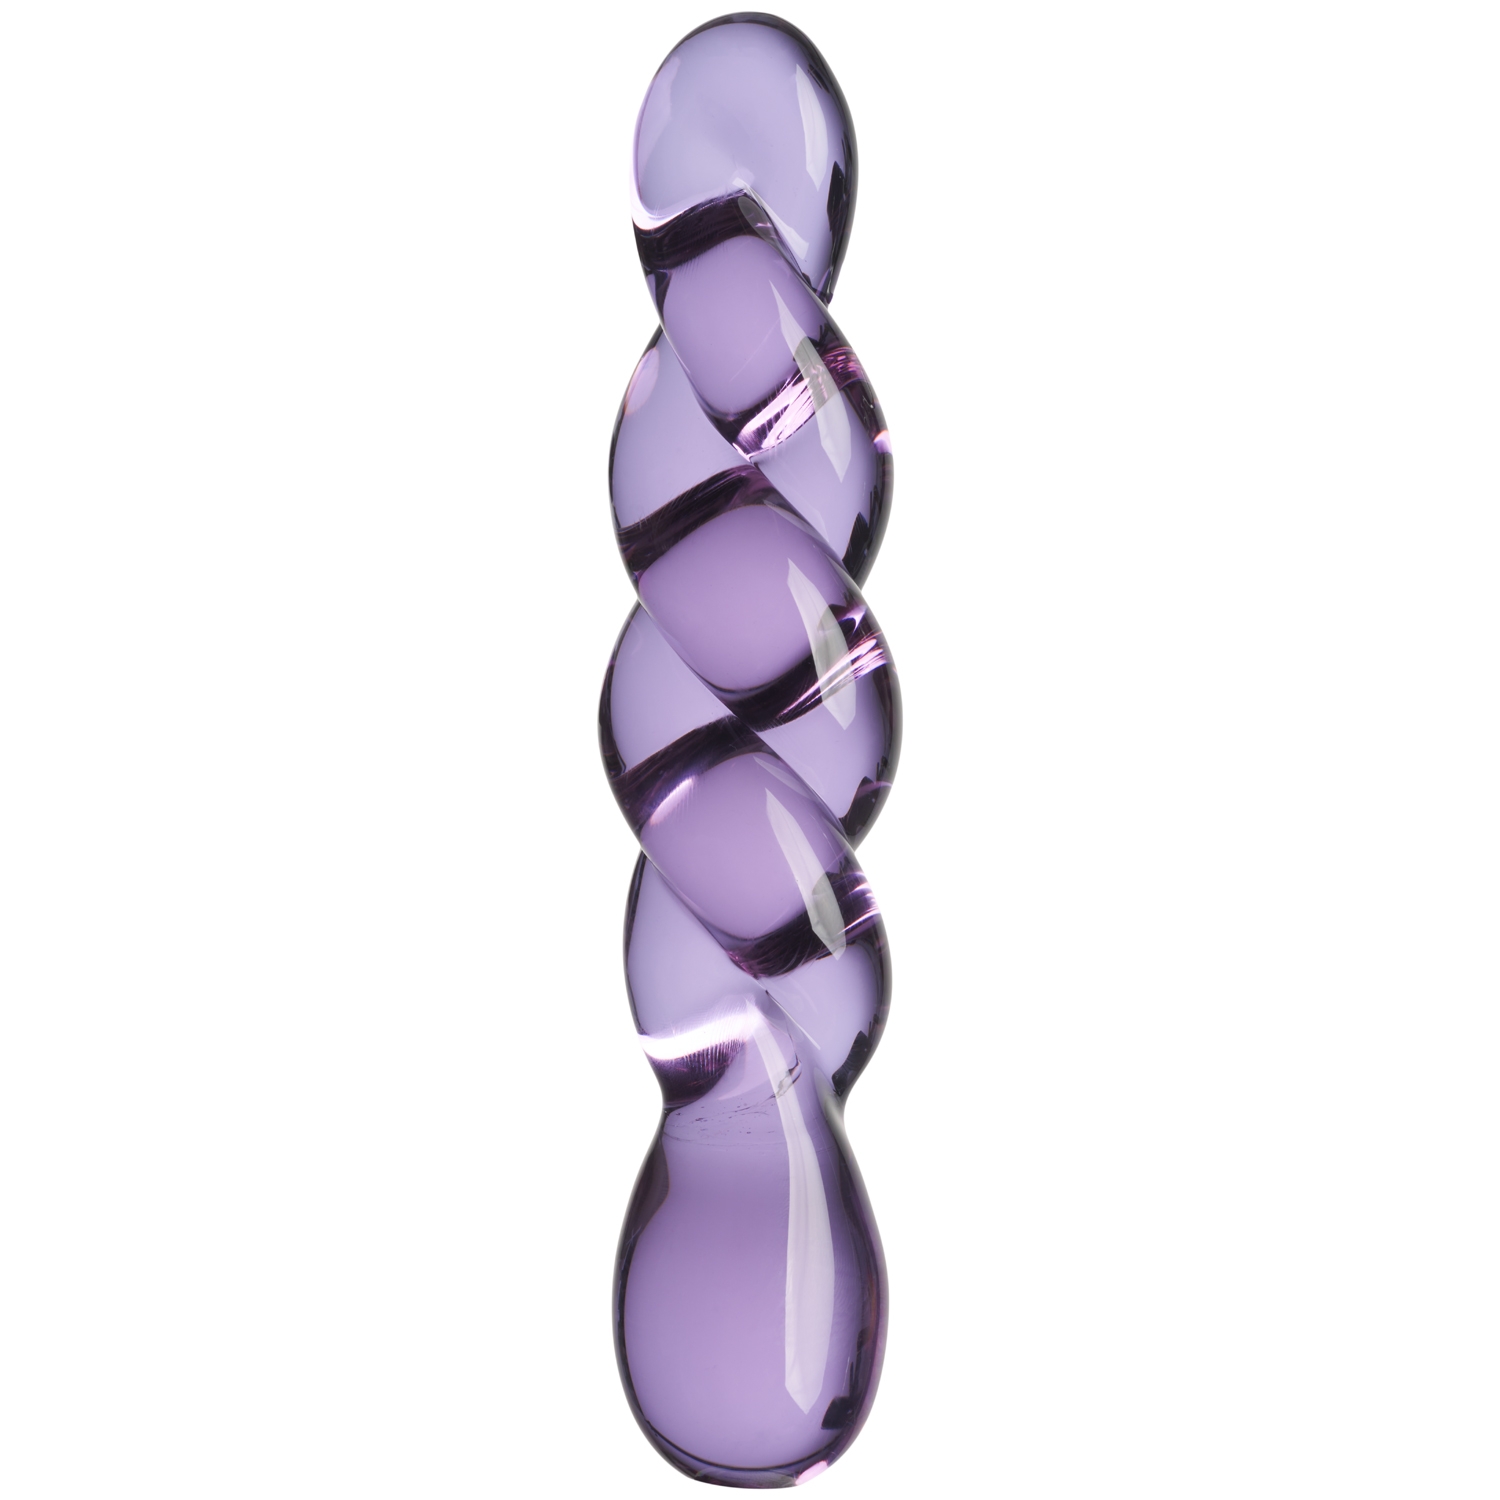 Sinful Twisted Lover Glas Dildo 19.8 cm    - Rosa